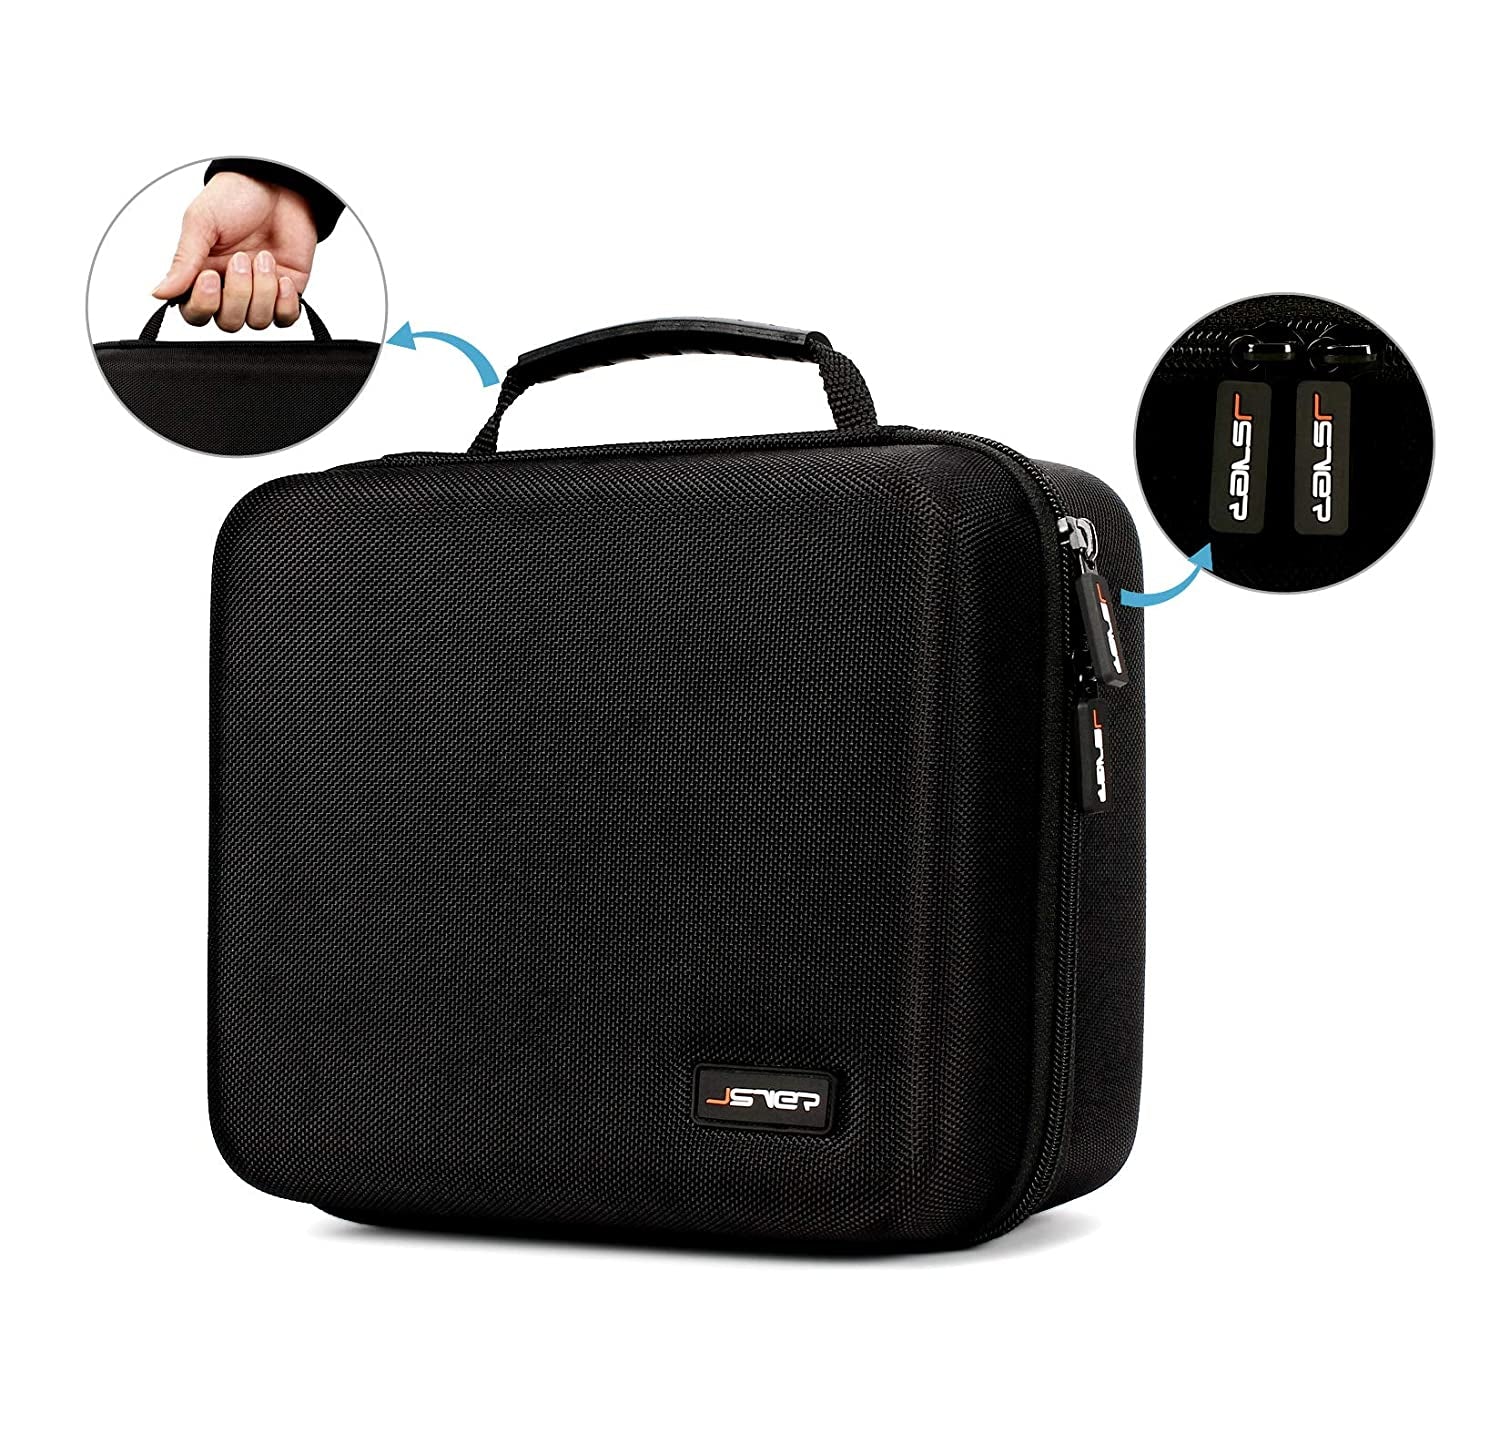 Hard Case for Meta Quest 2 JSVER Carrying Case for Quest/Quest 2/ Oculus Go/Samsung Gear Virtual Reality and Headset Gamepad Game Controller Kit, Home Storage, Travel Case for Meta/ Oculus Quest 2